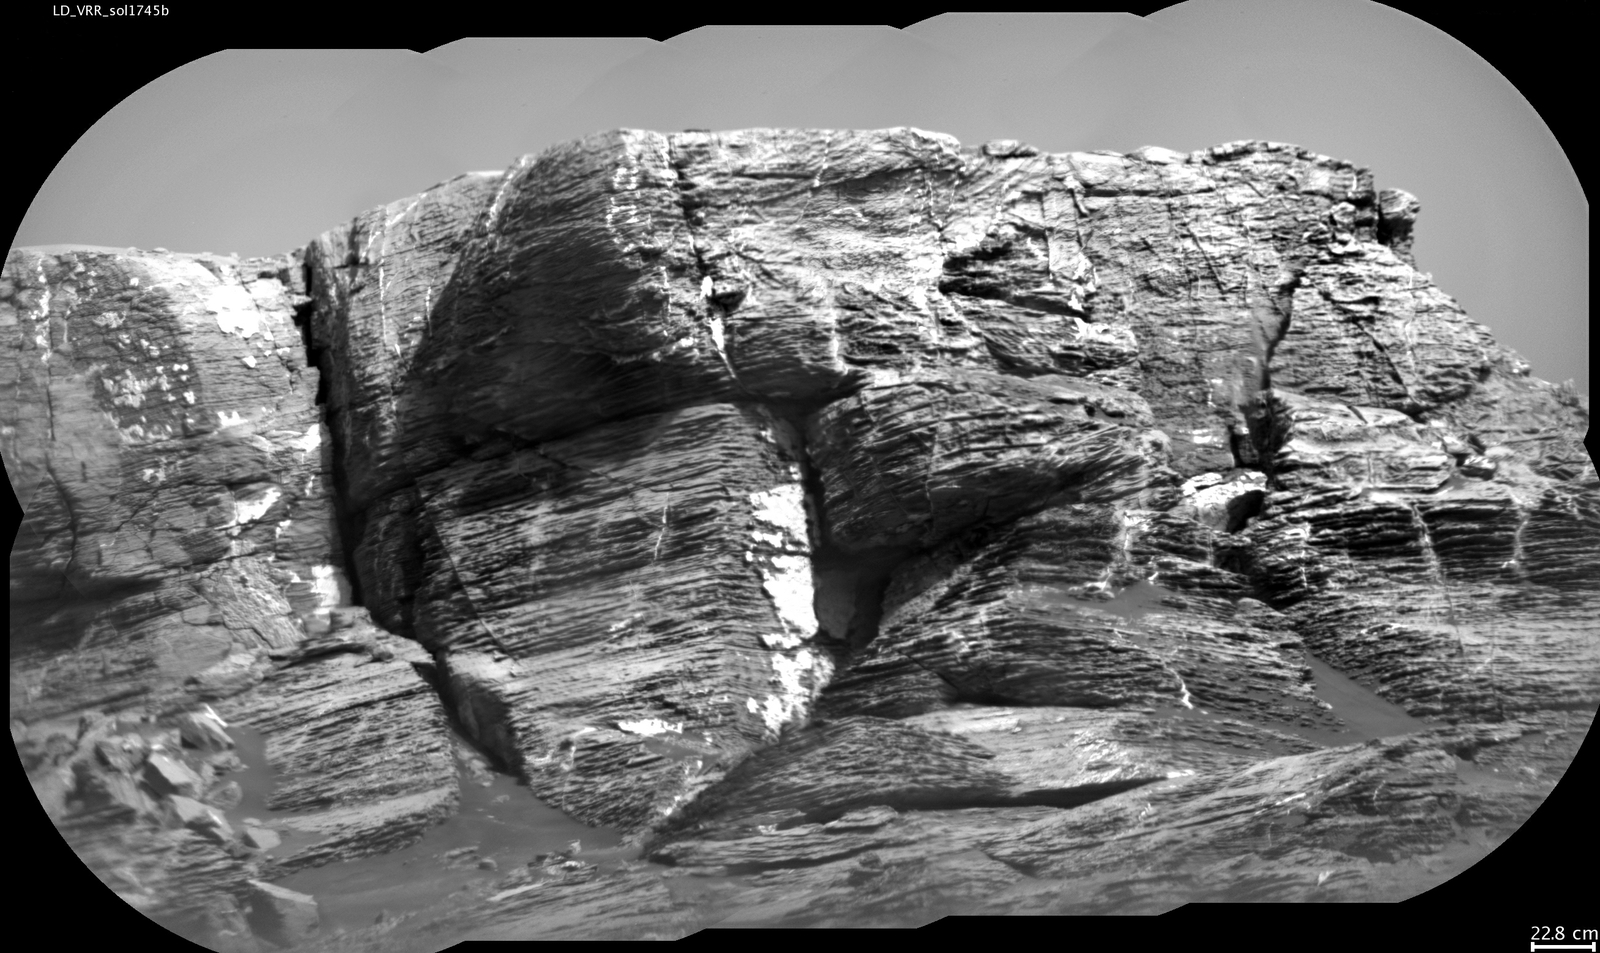 This view of "Vera Rubin Ridge" from the ChemCam instrument on NASA's Curiosity Mars rover shows sedimentary layers and fracture-filling mineral deposits. ChemCam's telescopic Remote Micro-Imager took the 10 component images of this scene on July 3, 2017, from a distance of about 377 feet.